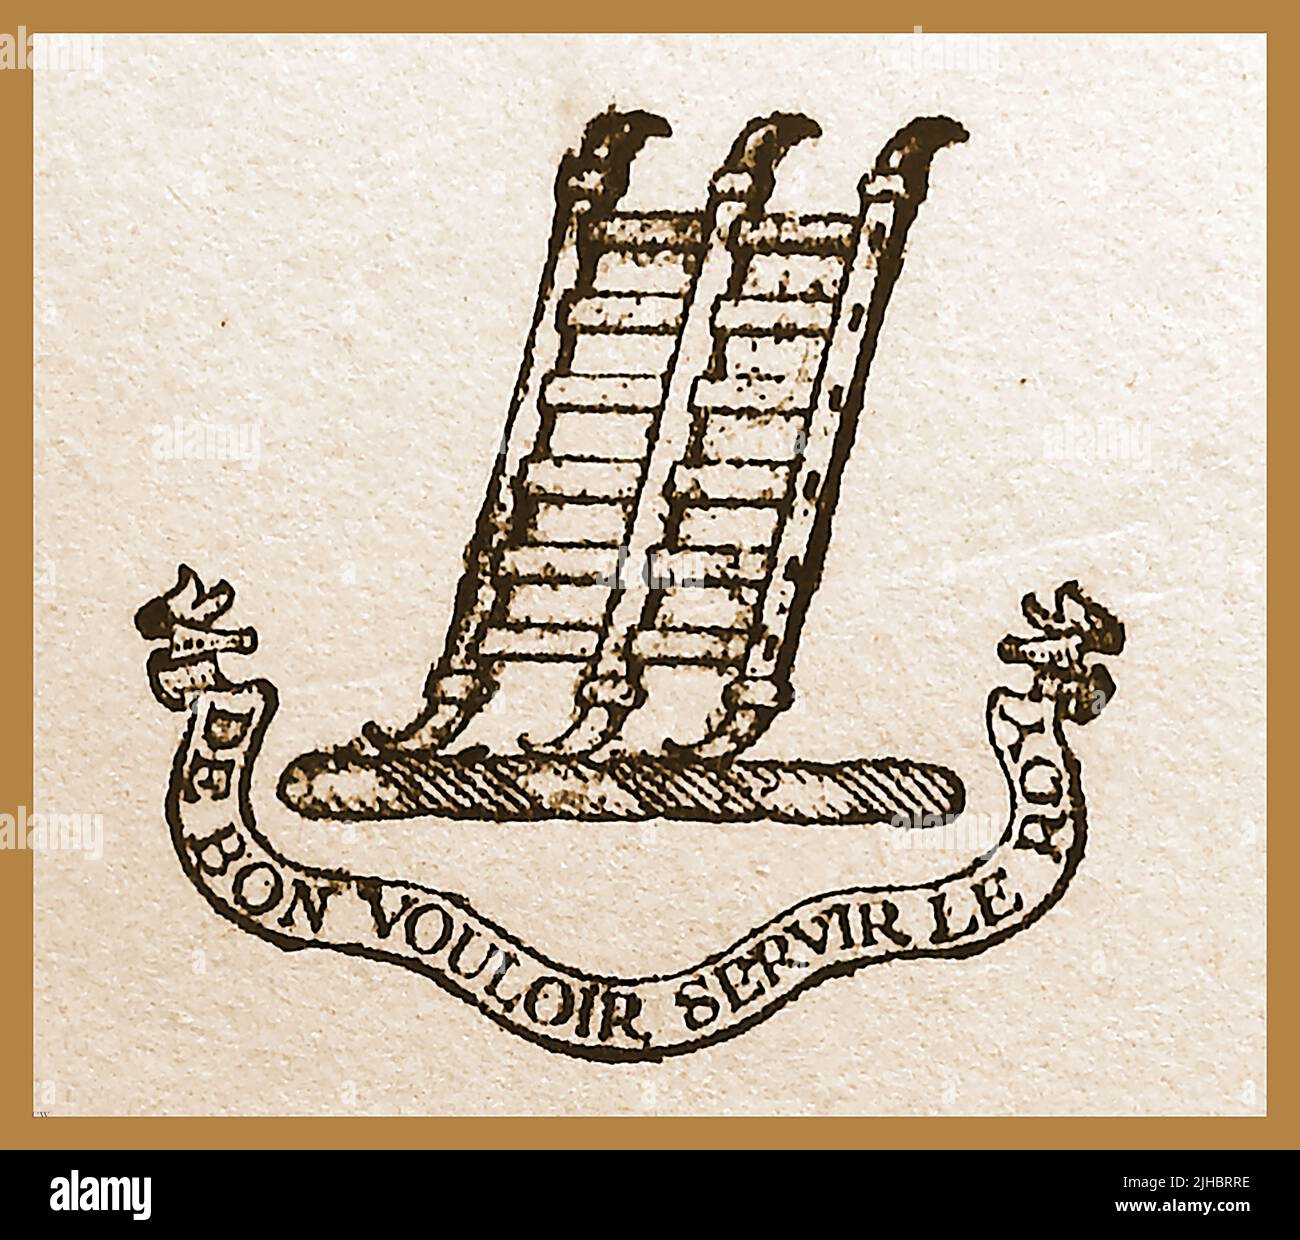 BENNET FAMILY MOTTO ,UK. The Bennet family motto is de bon vouloir servir le roy, which means to serve the king with good will. It also serves as the motto of the   Earl of Tankerville with a subsidiary title of Baron Ossulston through the Bennet family connection. The symbol may represent a ladder as a more modern looking ladder features on the motto of  the Tankerville and Earl of Bennet, of the haunted Chillingham Castle, Belford, Northumberland family. The Tankerville family are believed to have descended from the Viking Tancred the Fleming. Chillingham castle was originally a monastery. Stock Photo